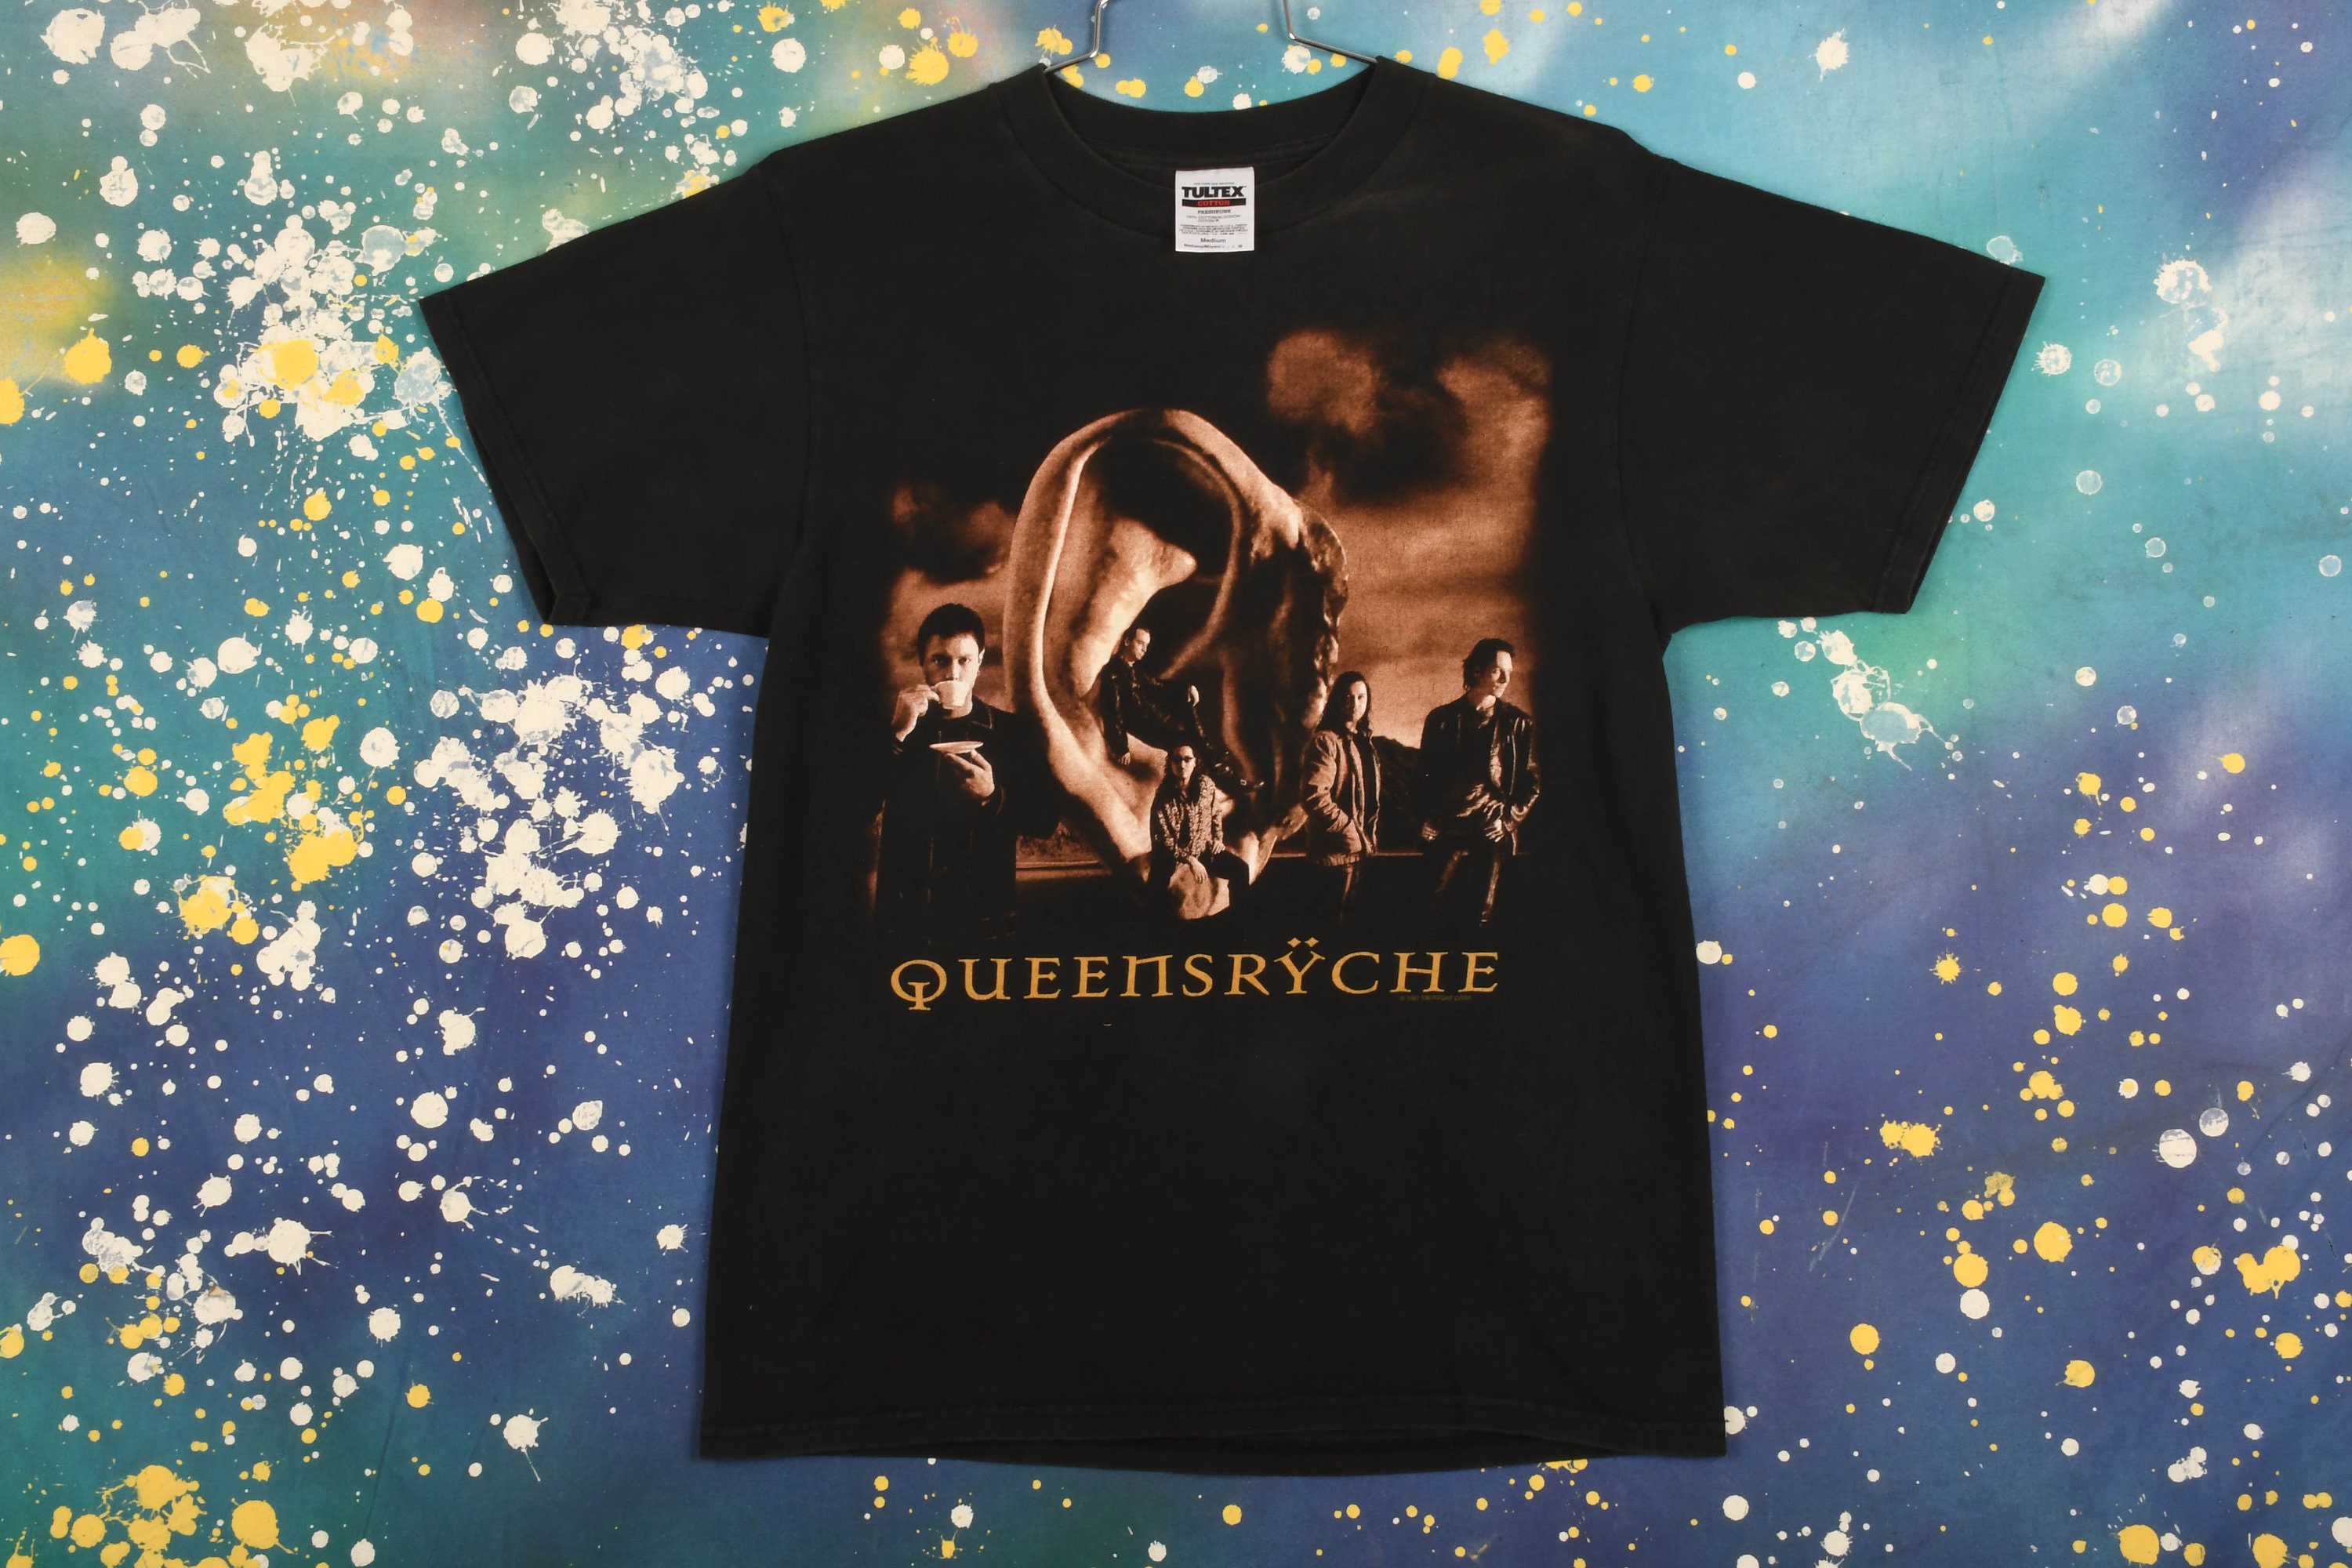 Queensryche t shirt Sizes S to 6X